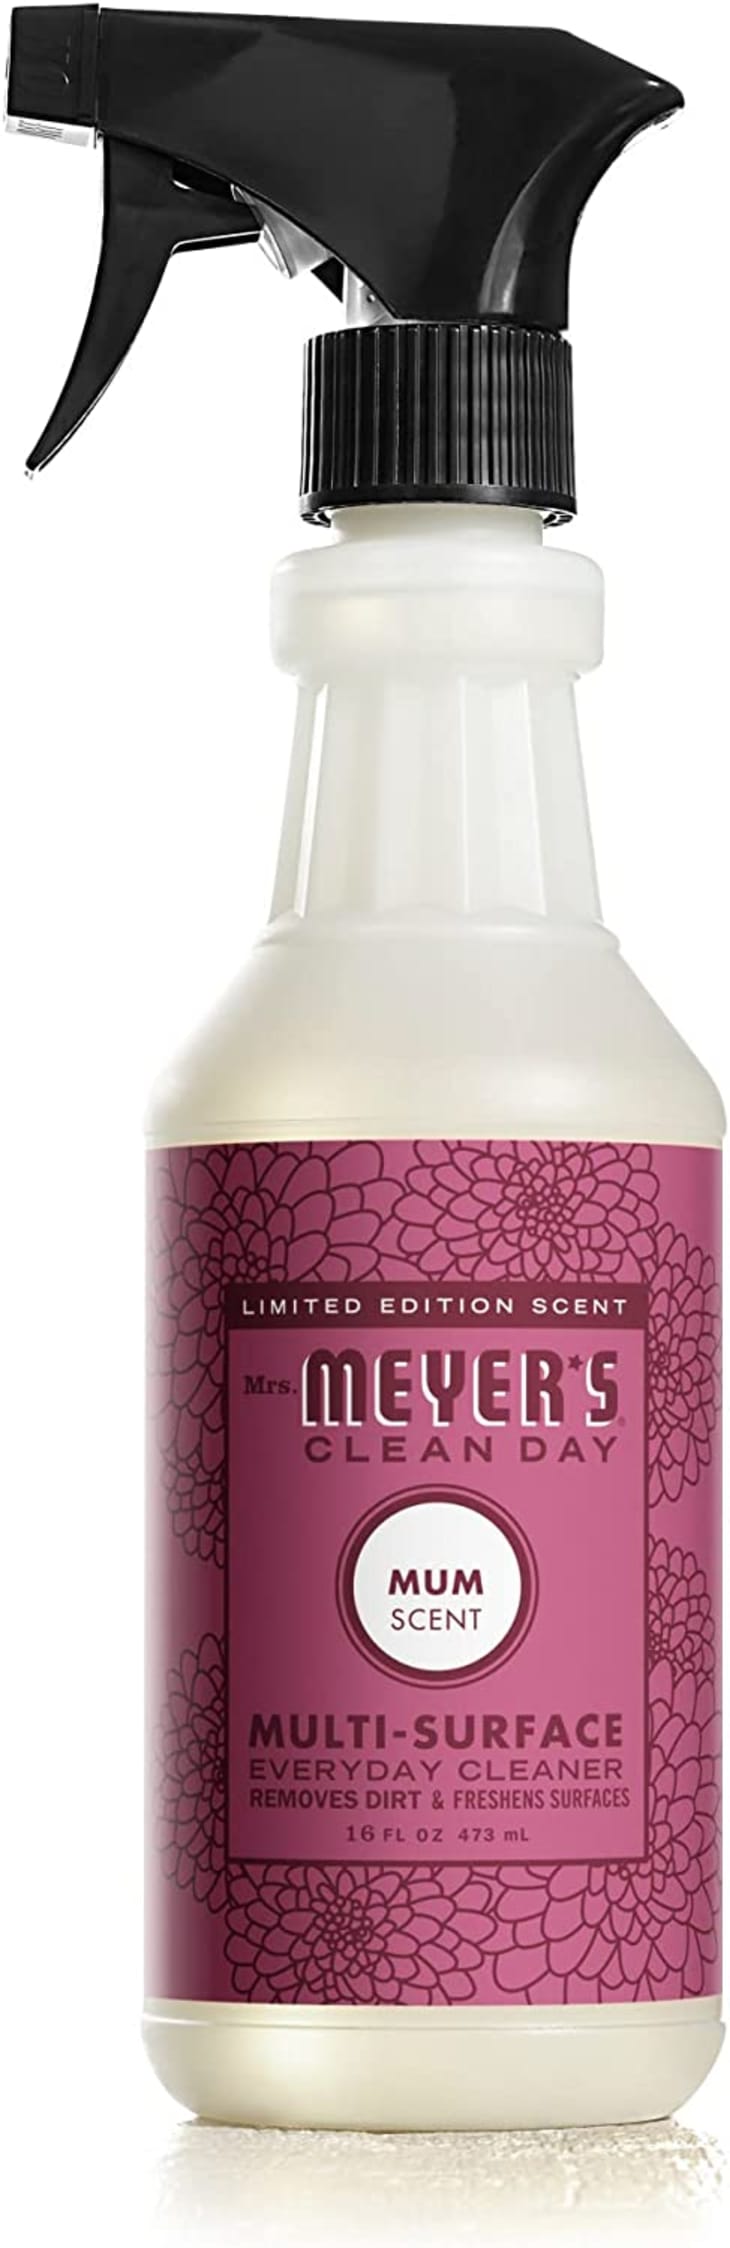 Mrs. Meyer's Clean Day Multi-Surface Cleaner Spray (Mum Scent) at Amazon